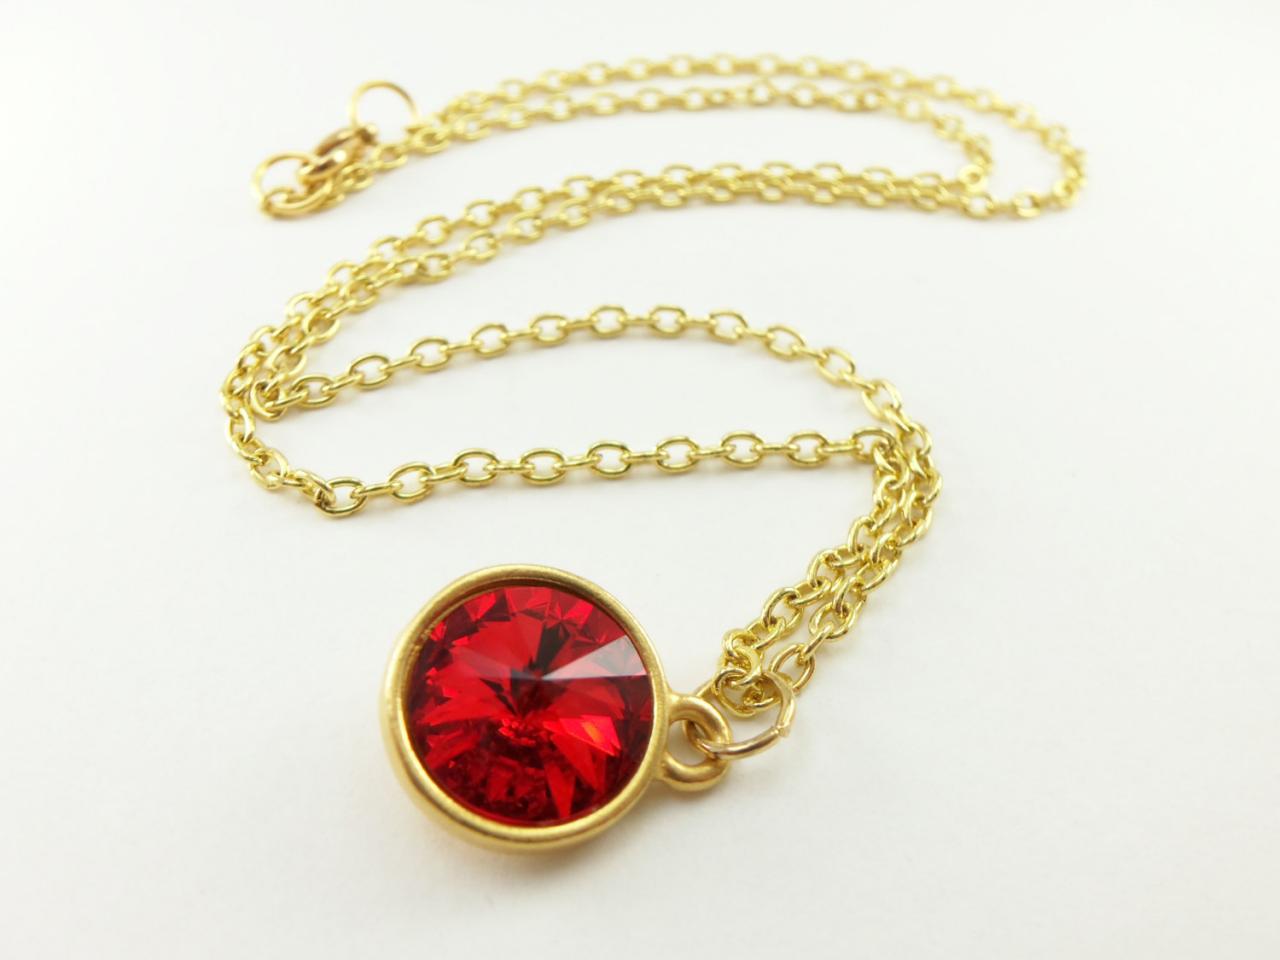 Candy Apple Red Necklace Gold Jewelry Bright Red Crystal Jewelry Gold Necklace Red Crystal Pendant